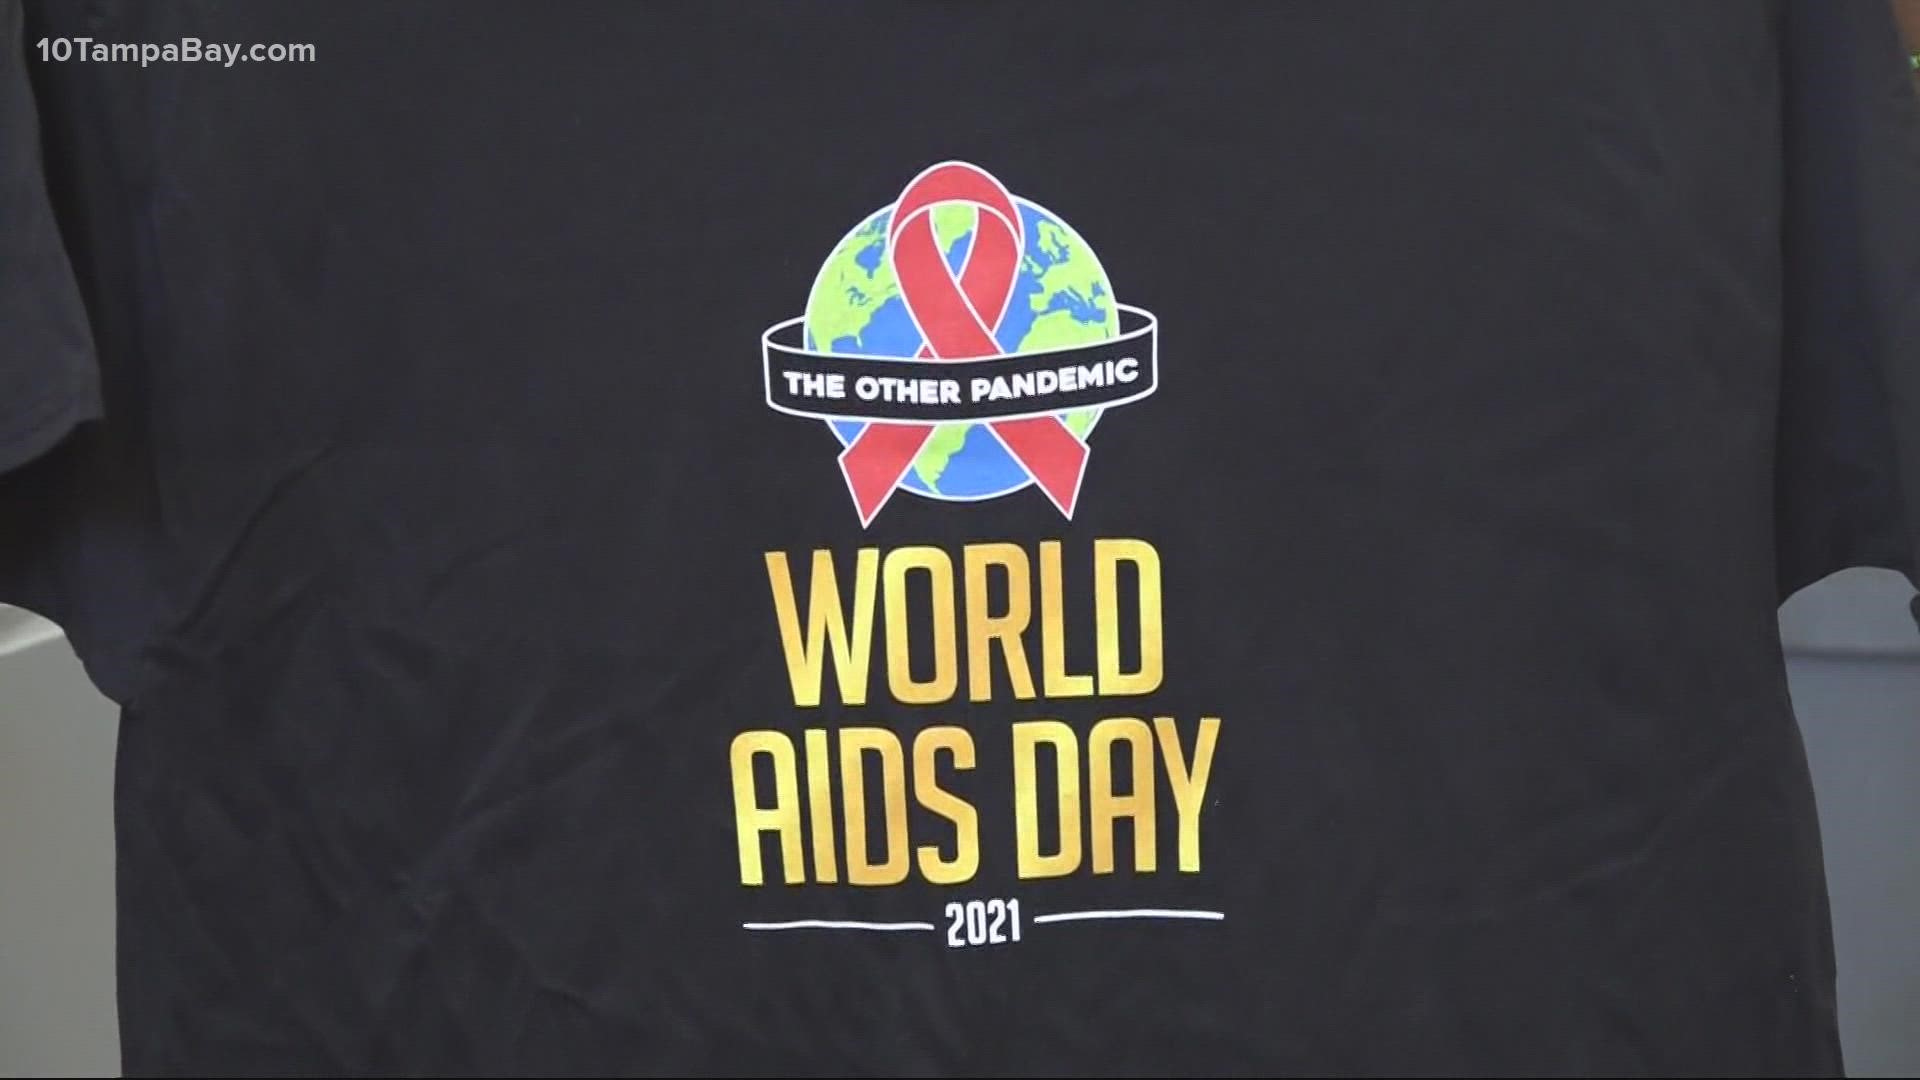 The Pinellas County Department of Health is partnering with organizations across the community to help share resources with those at risk for HIV/AIDS.